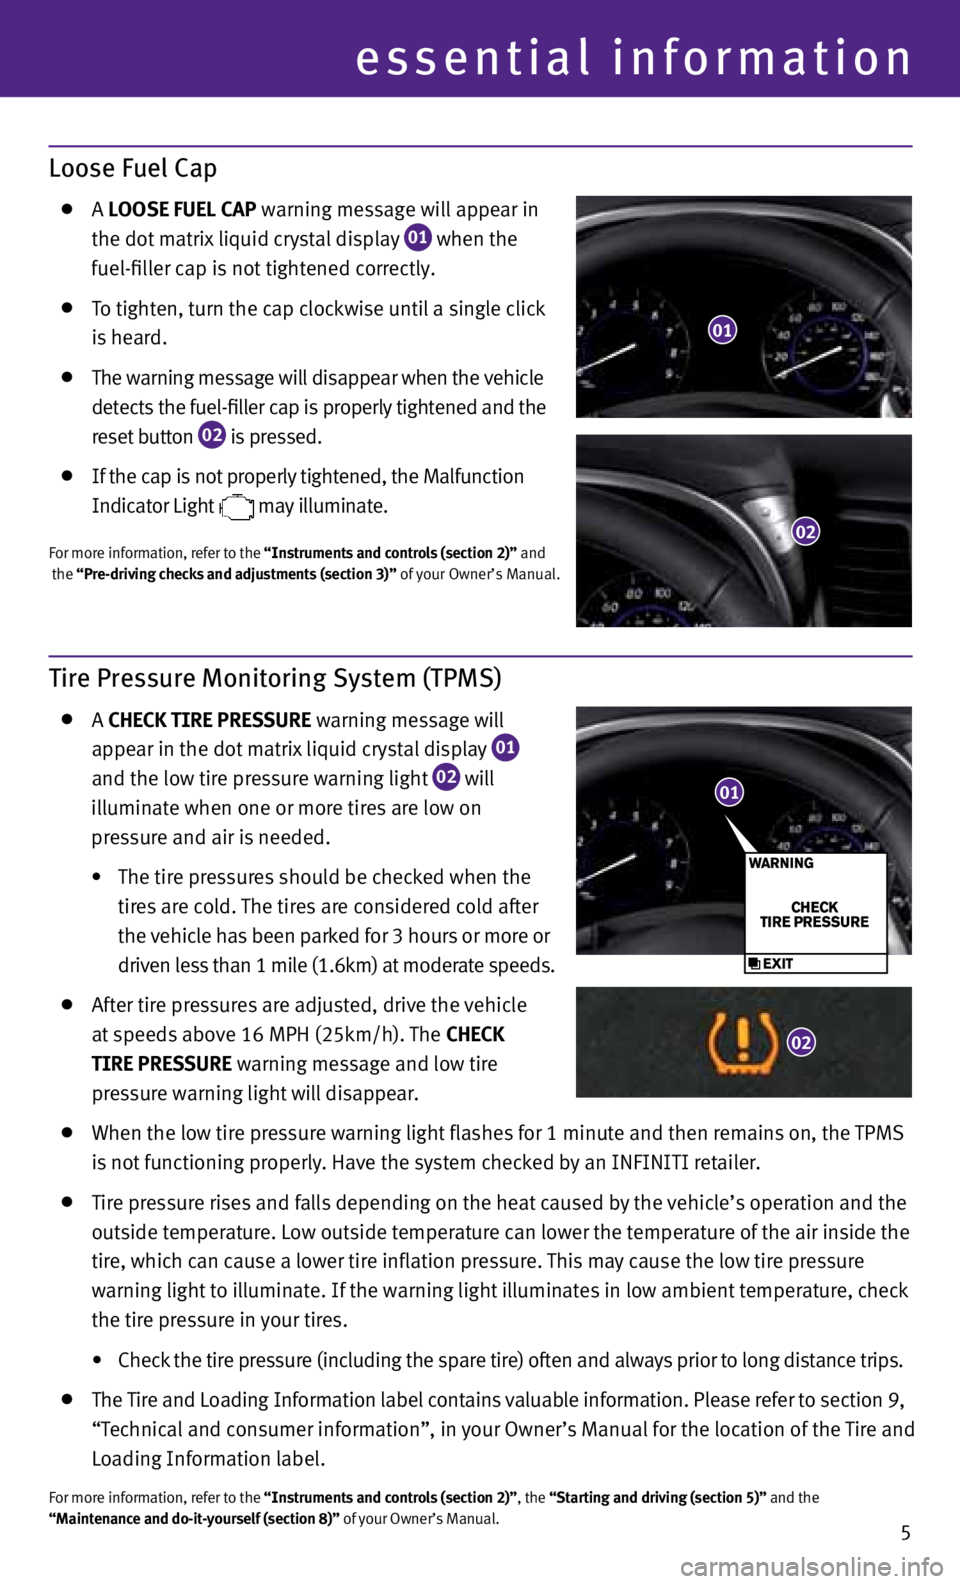 INFINITI FX 2013  Quick Reference Guide essential information
5
Loose Fuel Cap
  A LOOSE fUEL CAP warning message will appear in 
    the dot matrix liquid crystal display
 
01 when the 
    fuel-filler cap is not tightened correctly. 
 
  